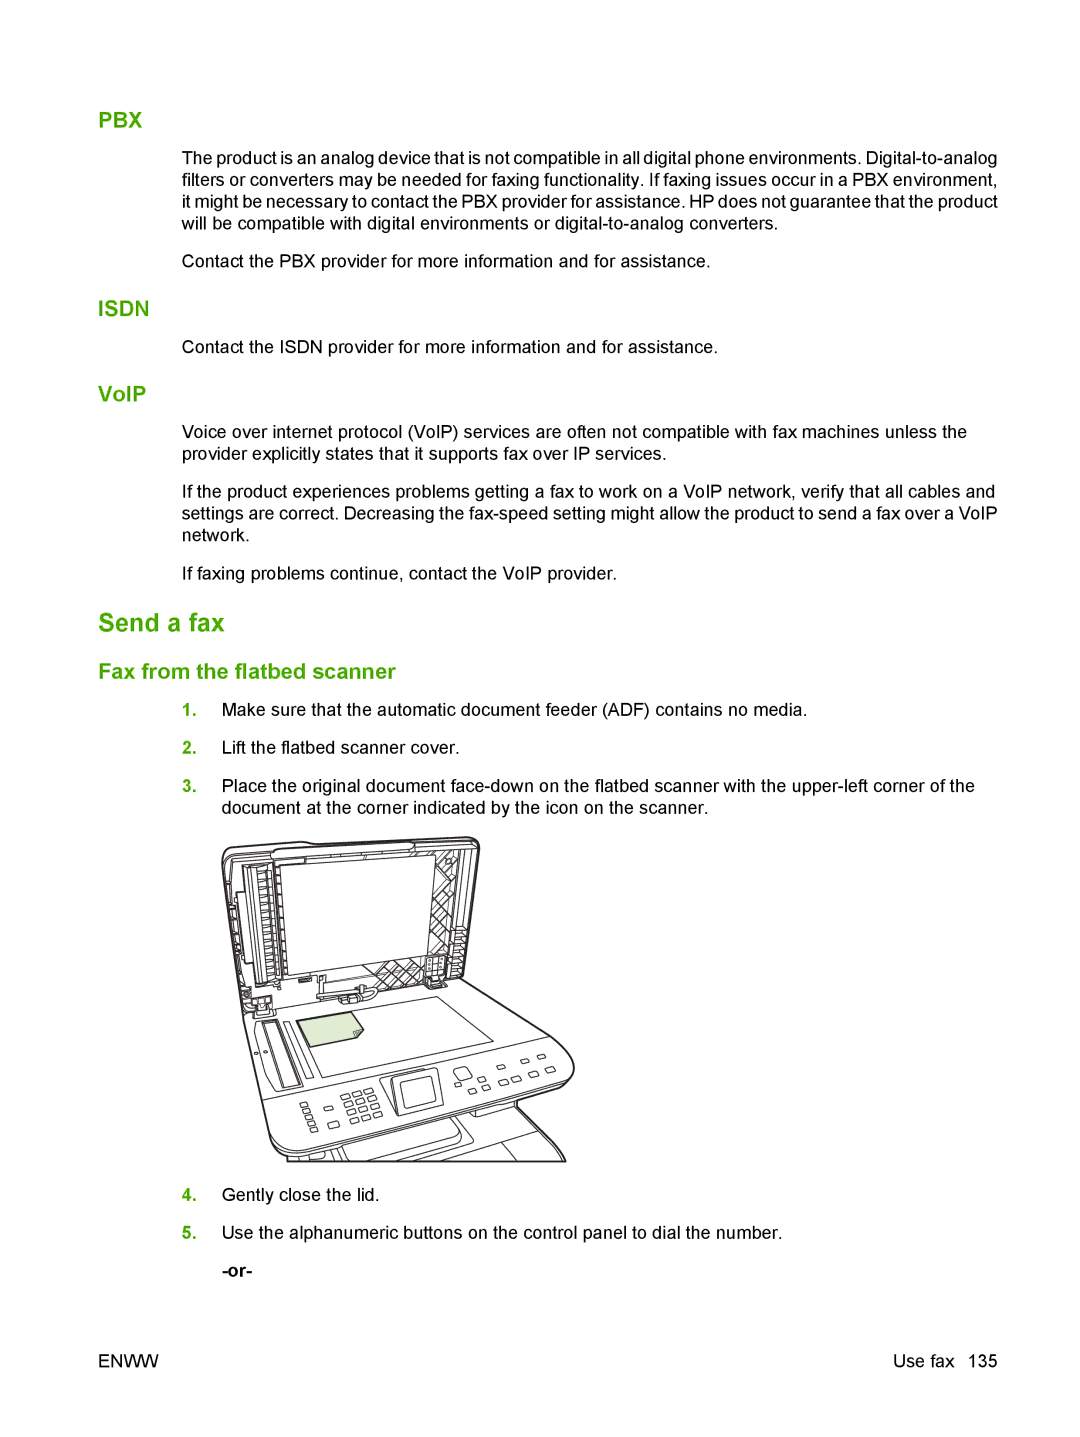 HP CM2320 manual Send a fax, VoIP, Fax from the flatbed scanner 